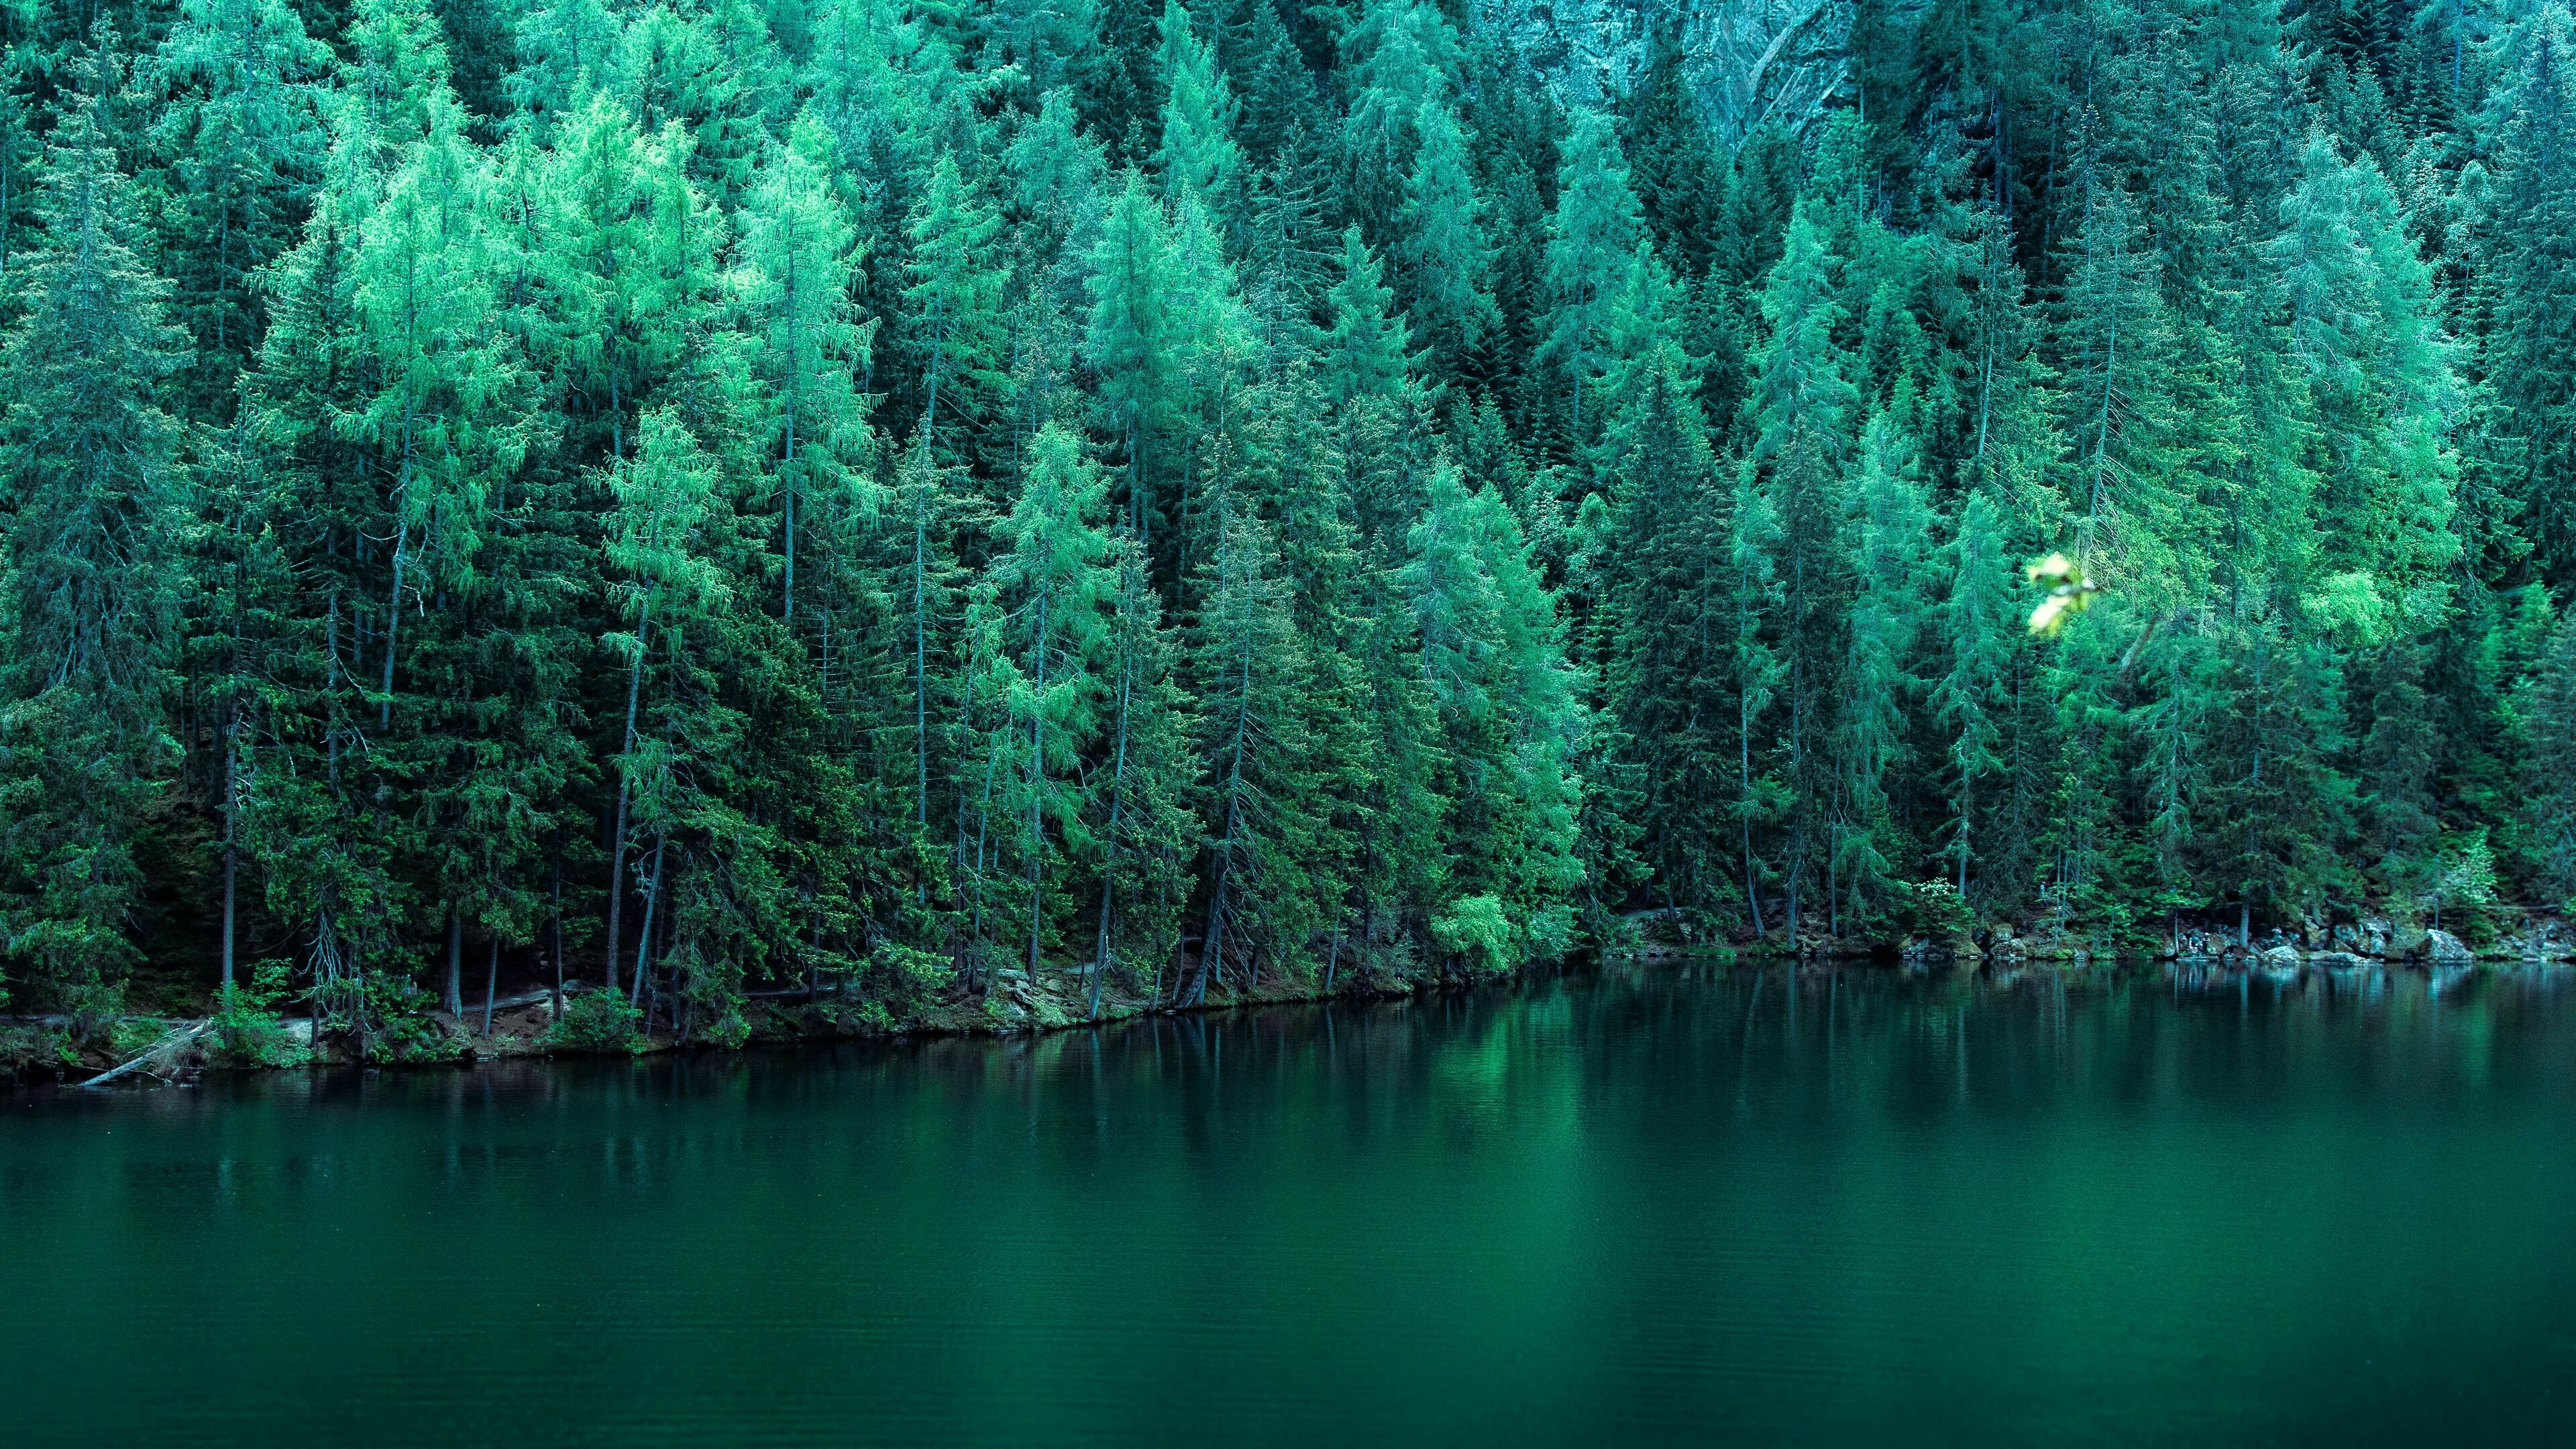 Pine trees along a lake, Tranquil waters, Serene reflections, Nature's harmony, 3840x2160 4K Desktop